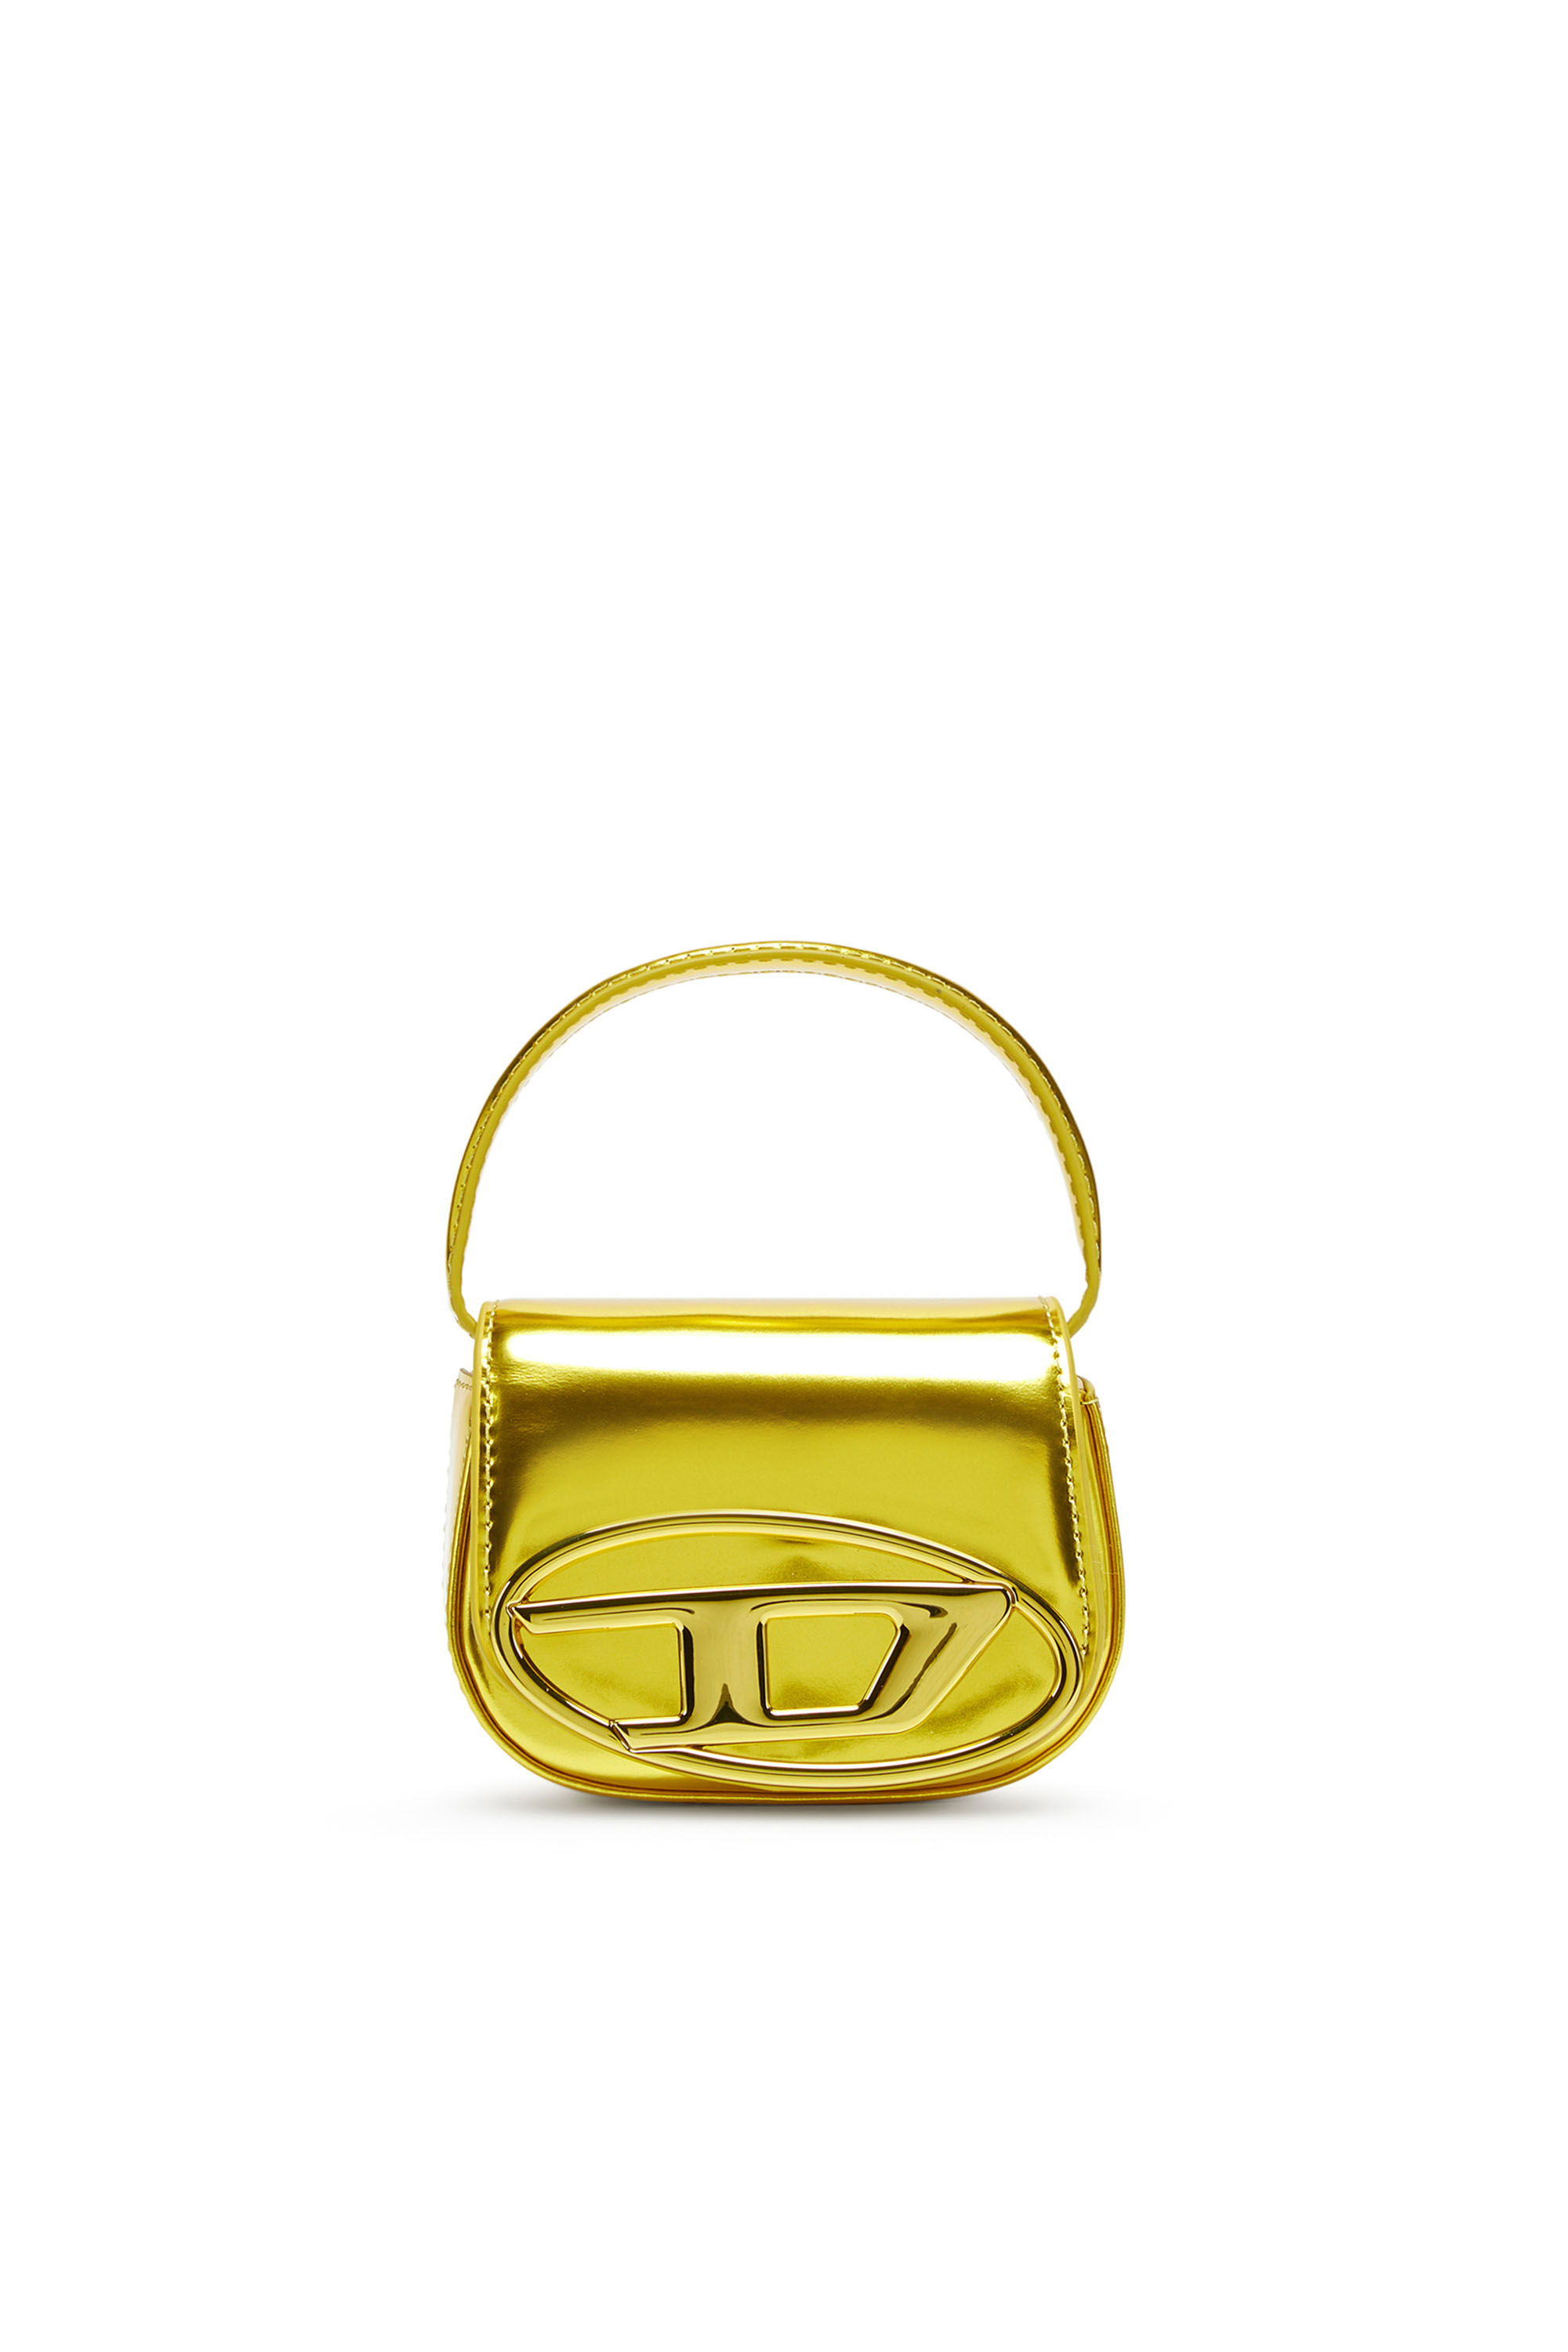 Diesel - 1DR-XS-S, Woman 1DR-XS-S-Iconic mini bag in mirrored leather in Yellow - Image 1